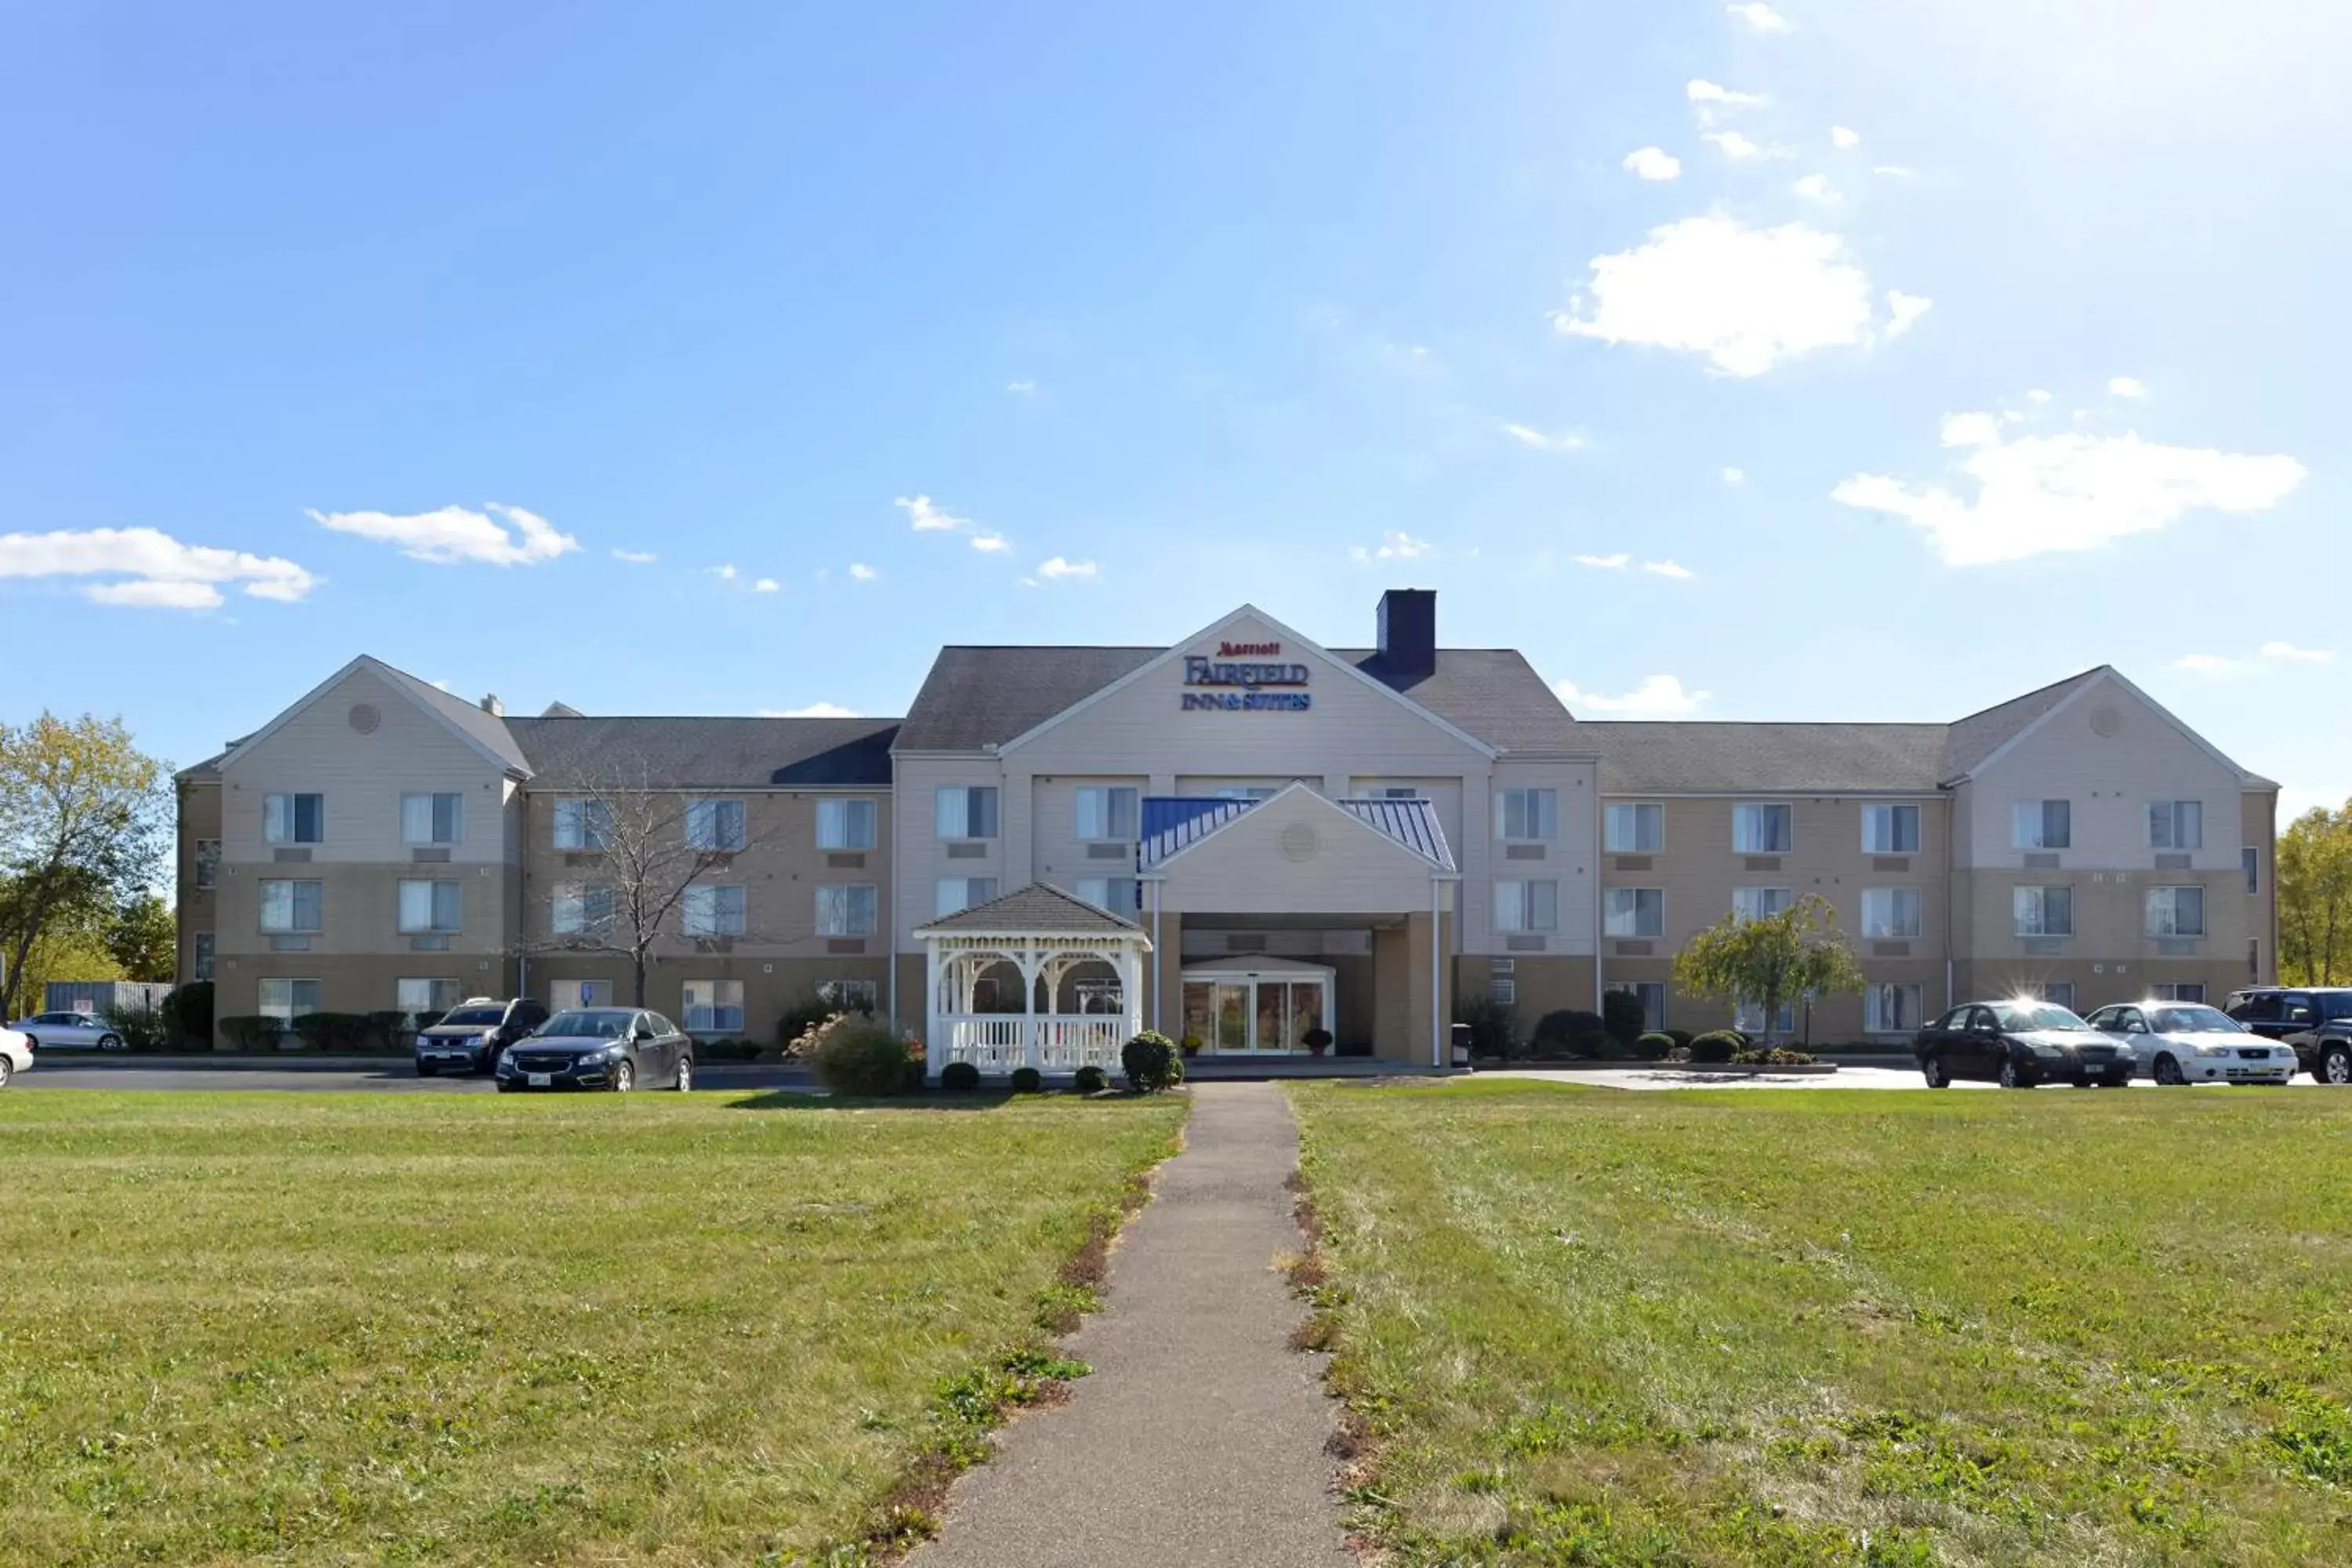 Property Building in Fairfield Inn and Suites by Marriott Dayton Troy